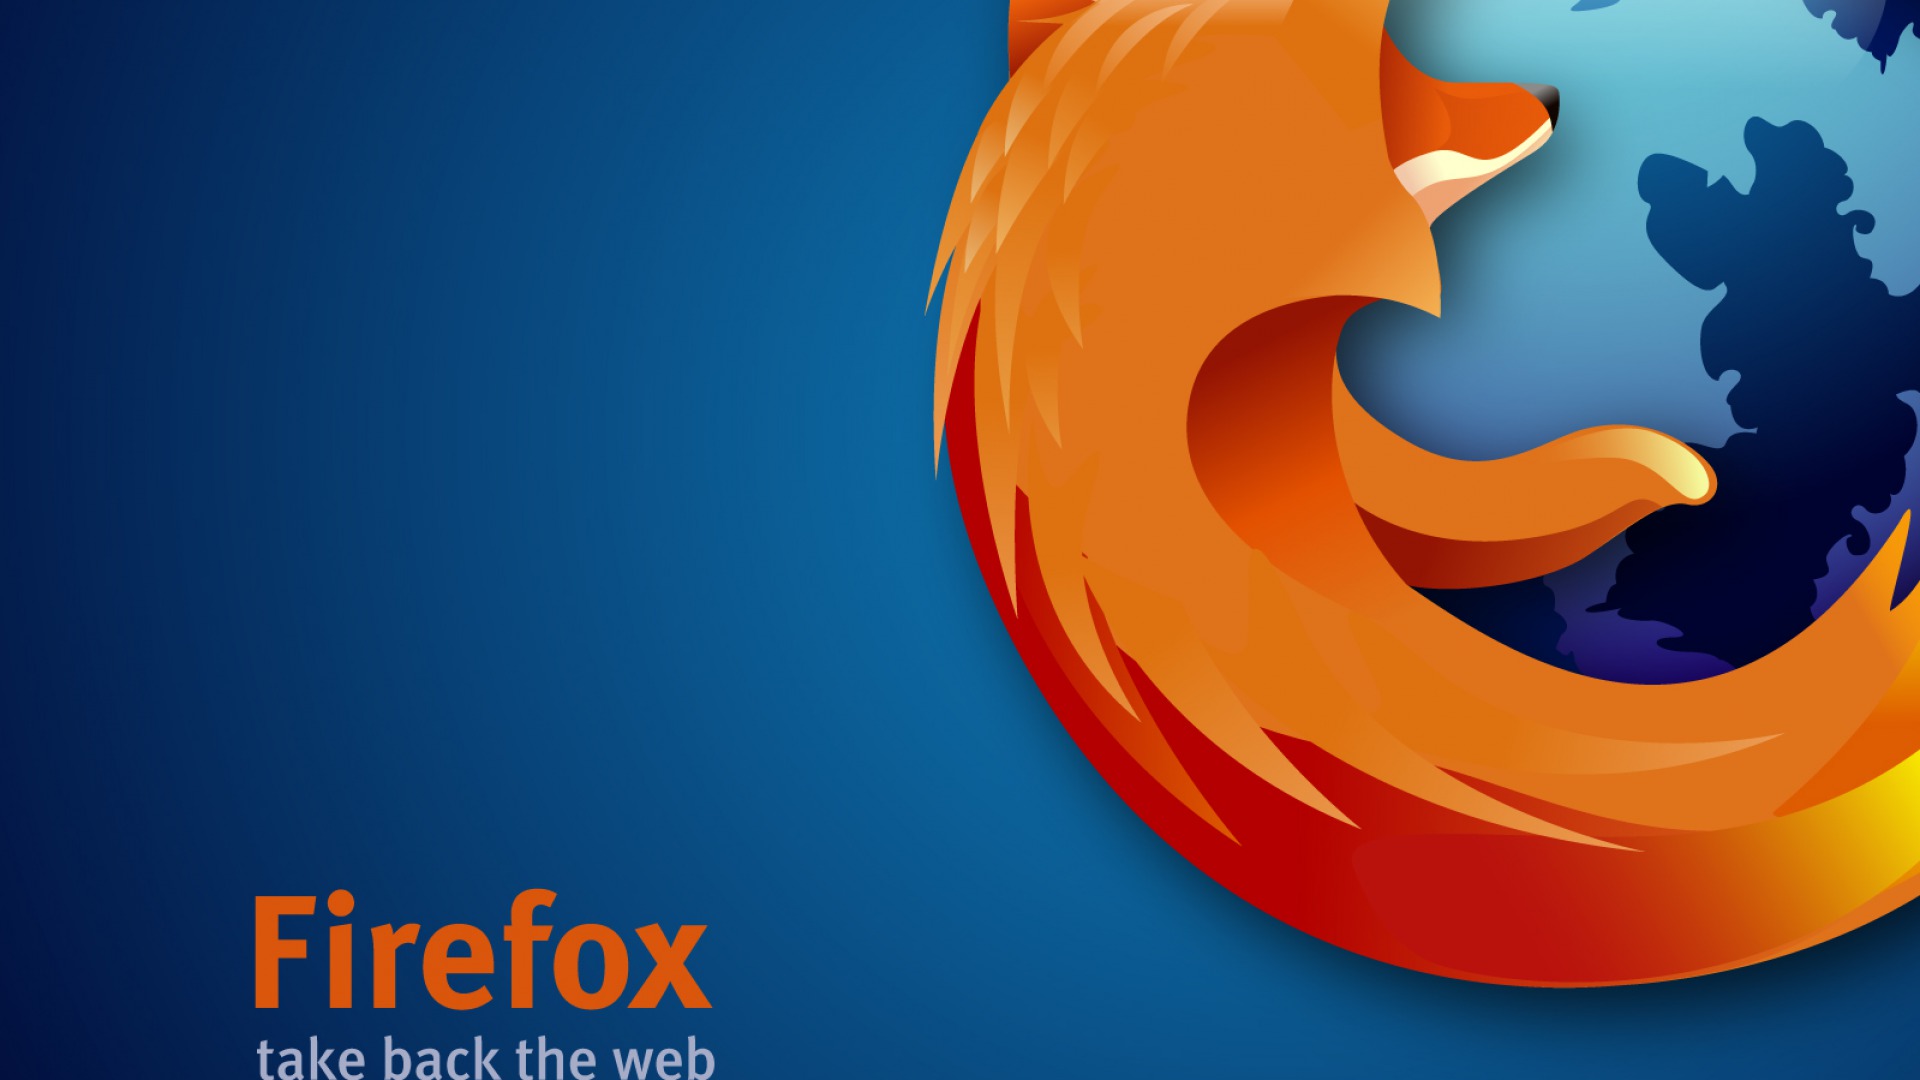 Firefox File Sharing: An amazing service you should know about